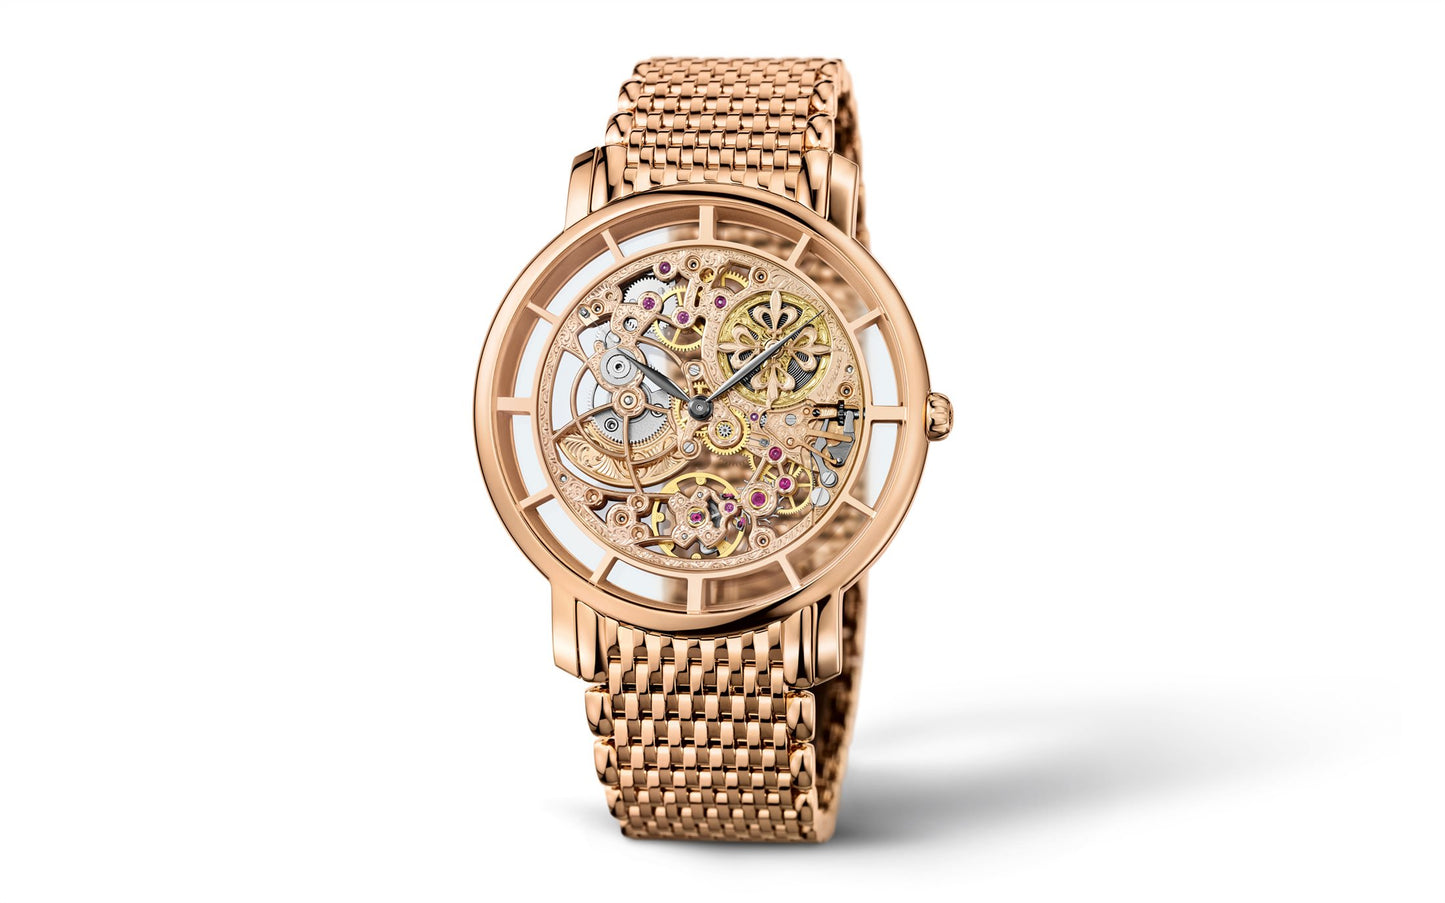 Patek Philippe Complication Calatrava Skeleton movement with hand-engraved decoration, 18k Rose Gold, 39mm, Ref# 5180/1R-001, Main  view